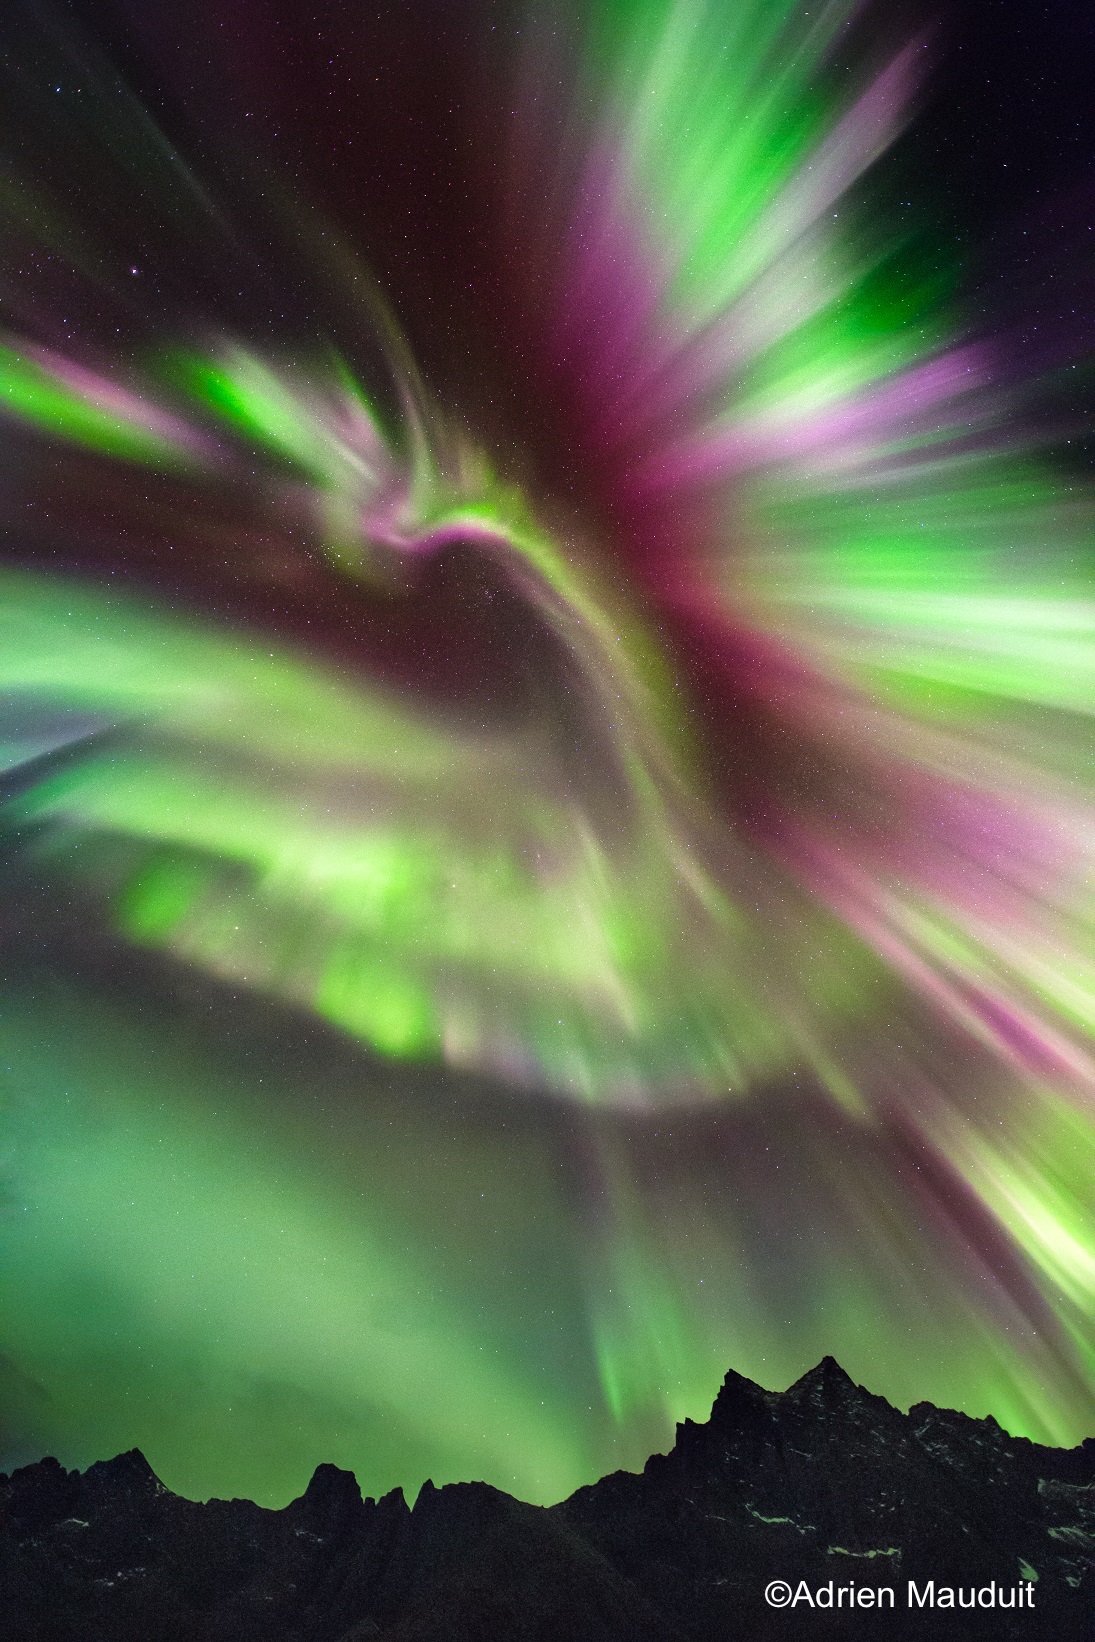 aurora shaped like phoenix rising over the landscape - by Adrien Mauduit